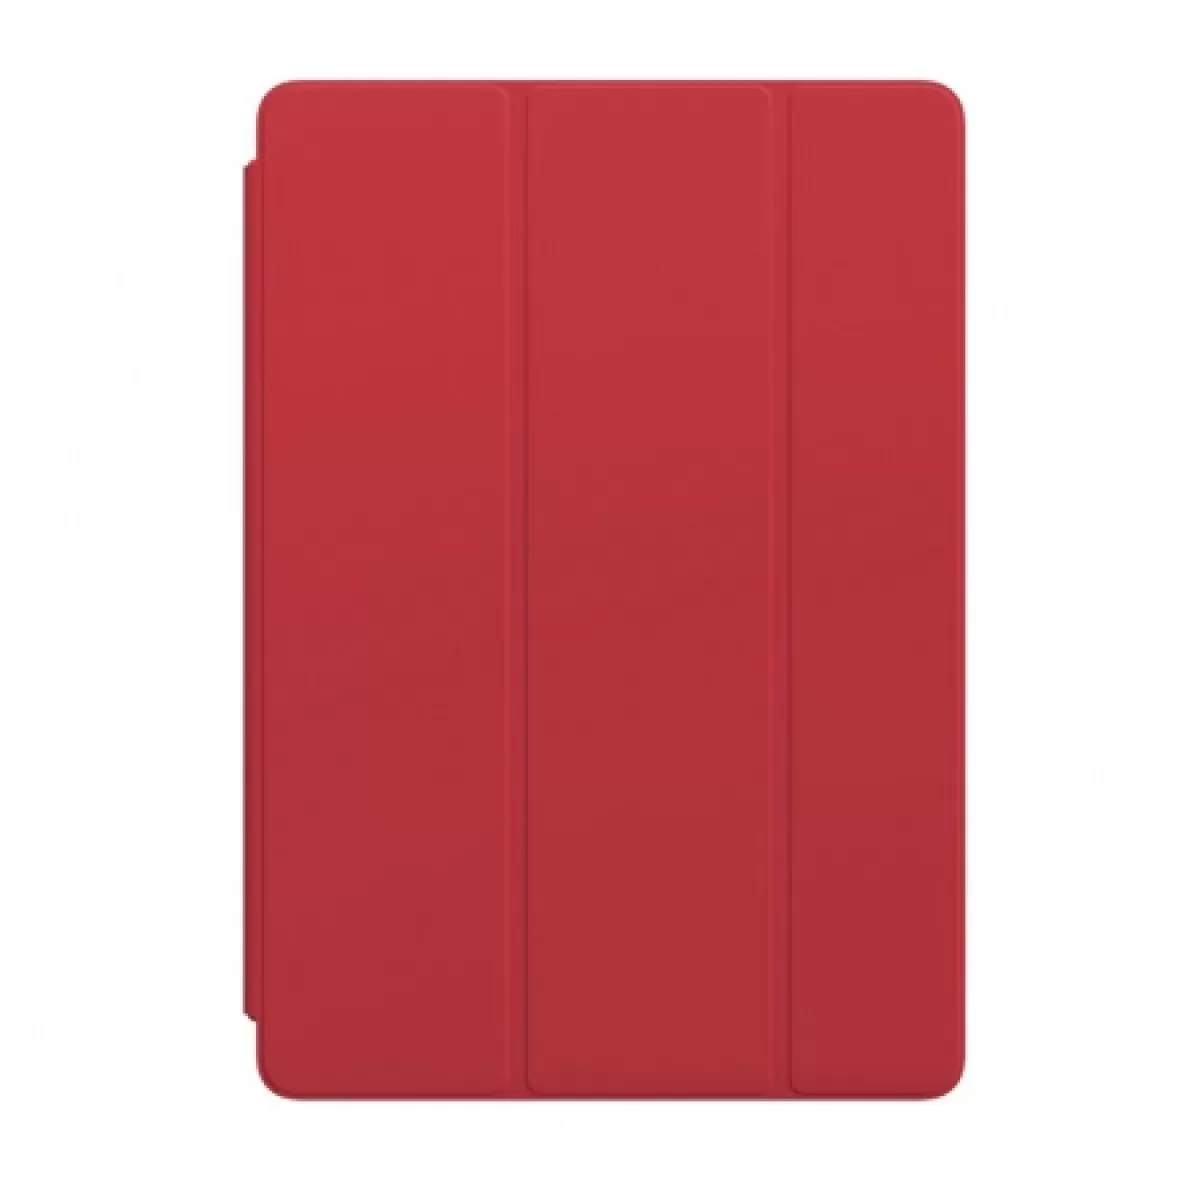 Apple Smart Cover for 10.5inch iPad Pro (PRODUCT) RED